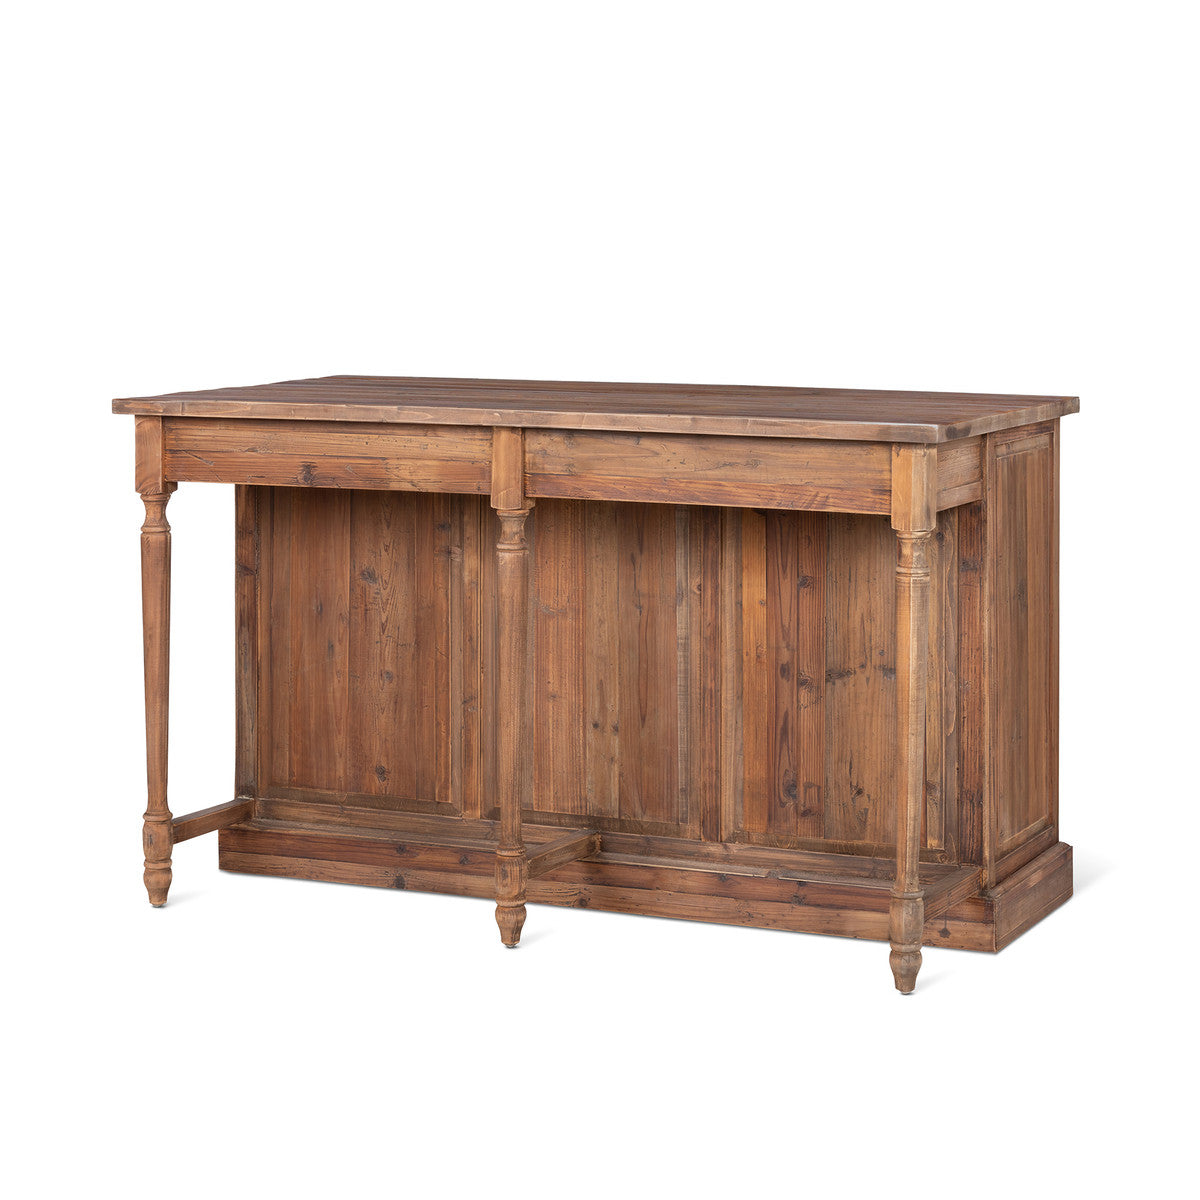 Reclaimed Wood Kitchen Island With Bar Extension